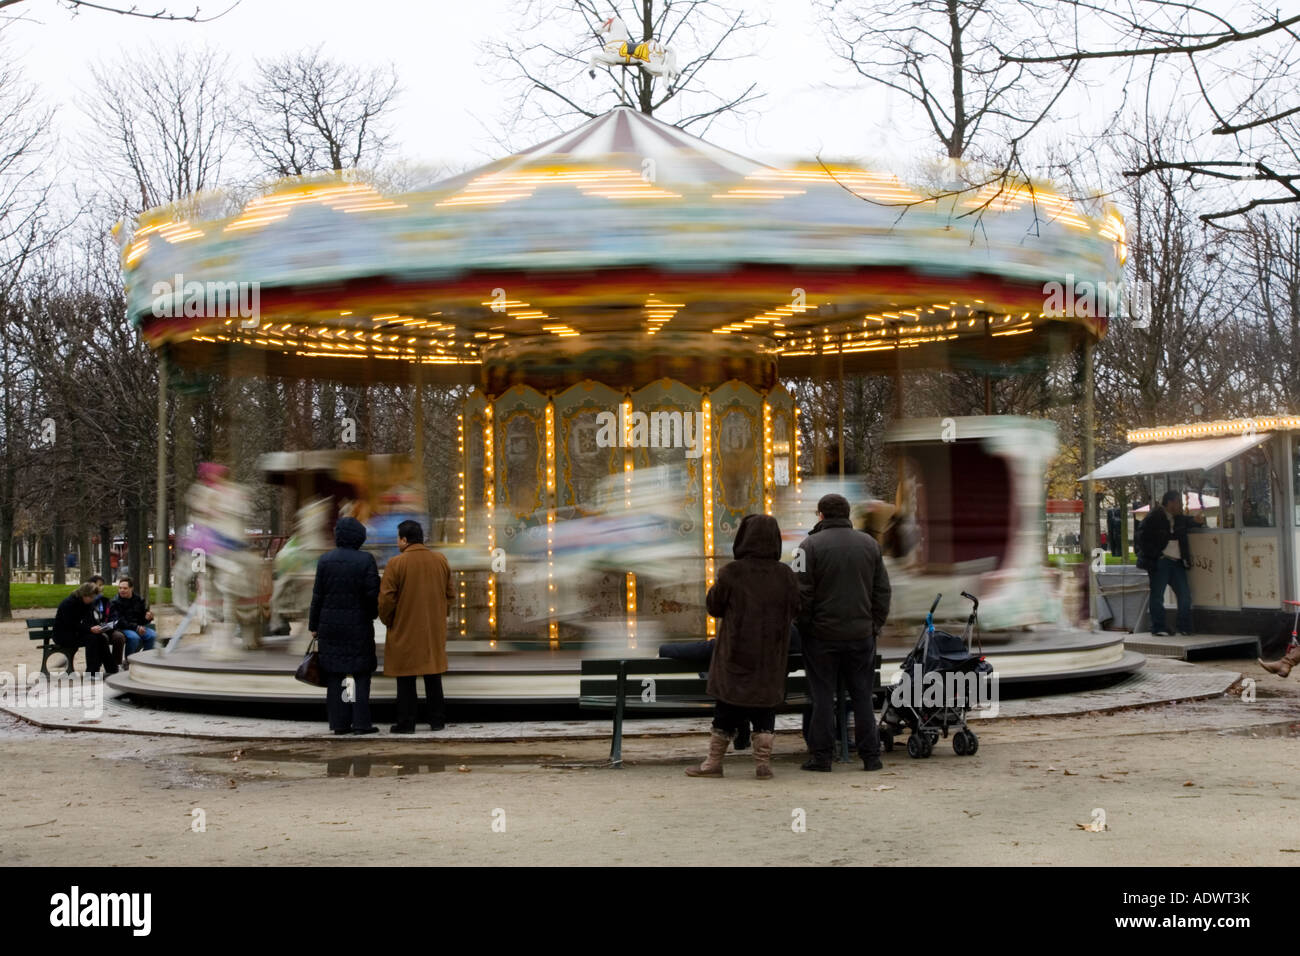 Parents watch their children on the carousel in Jardin des Tuileries Central Paris France Stock Photo